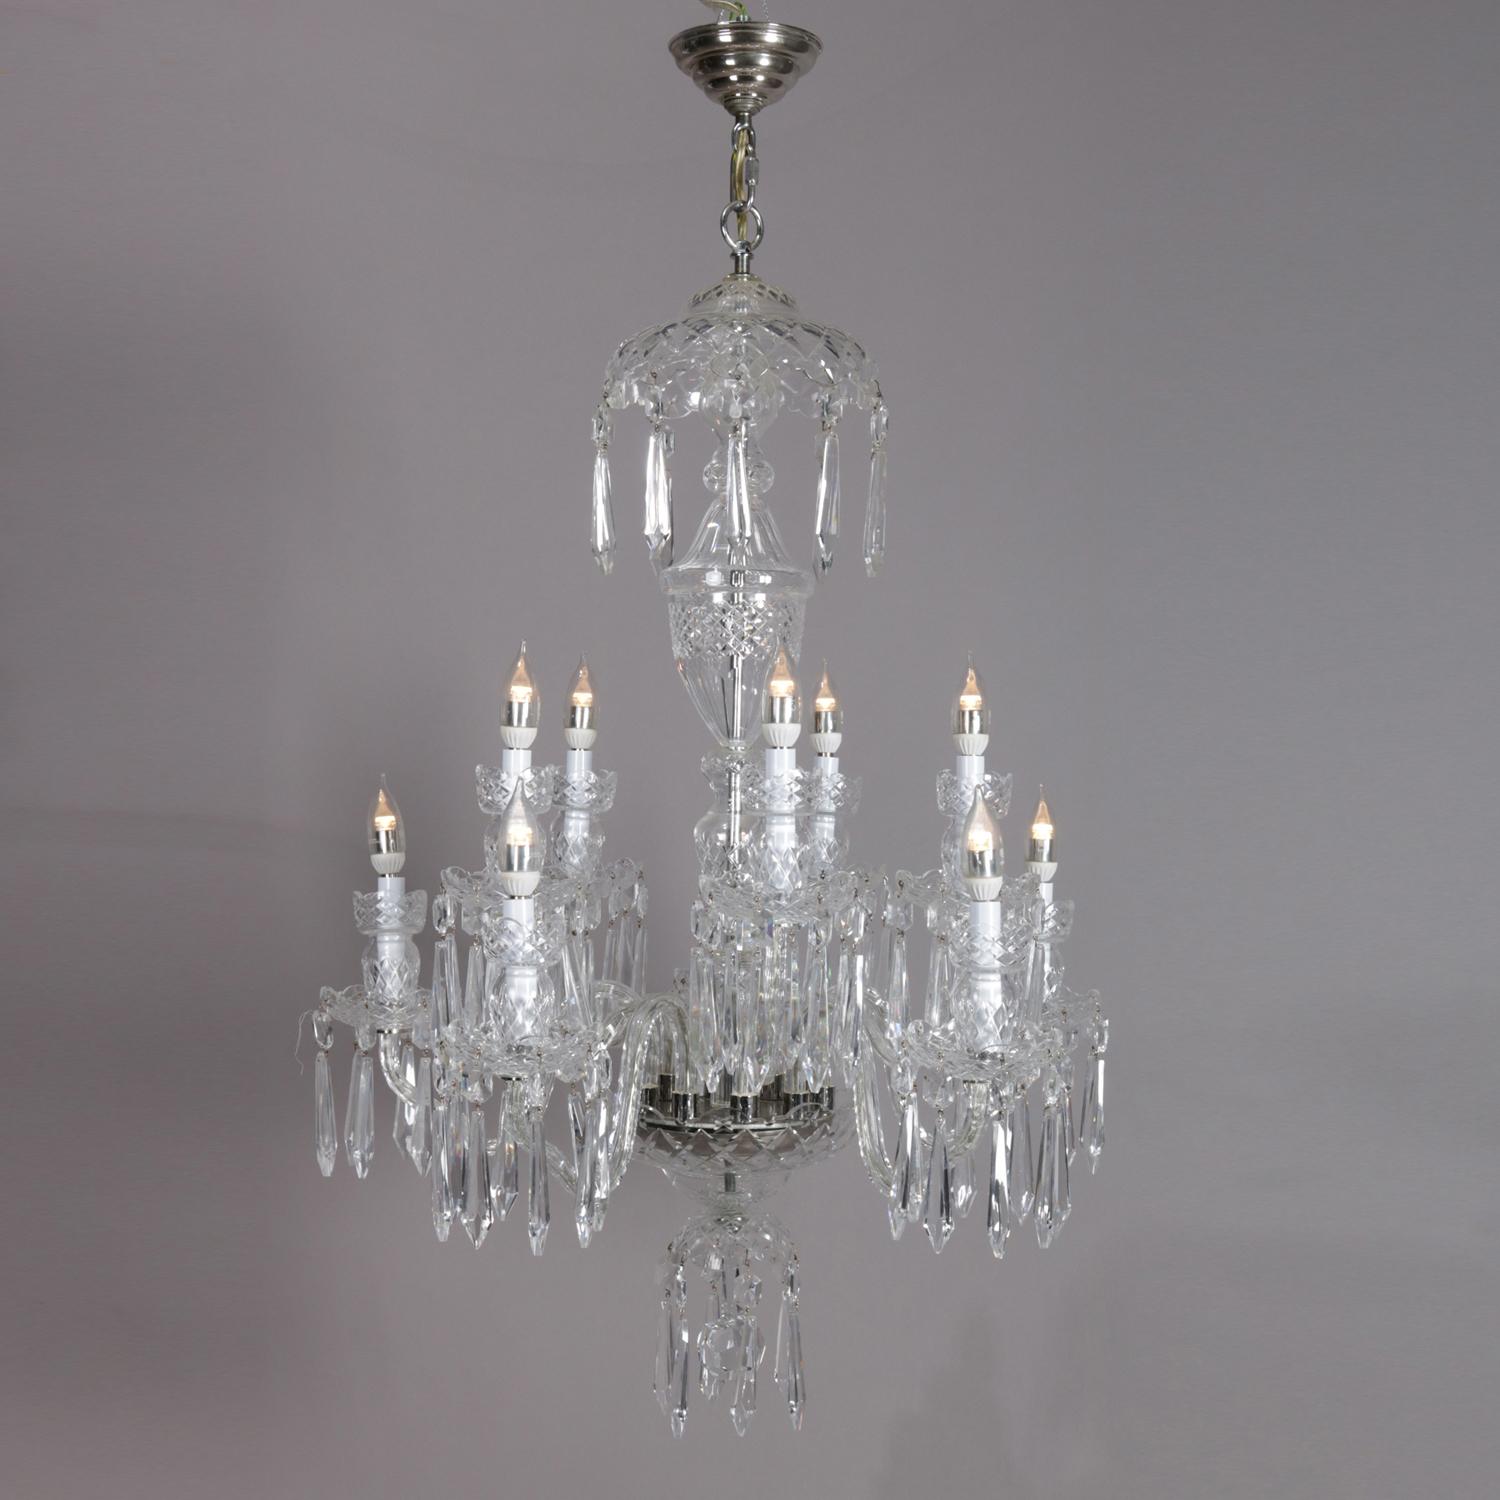 Irish Waterford chandelier features chrome frame with diamond patterned cut crystal urn form body with ten S-scroll crystal arms terminating in candle lights, highlighted with hanging cut crystals, signed Waterford including prisms, circa